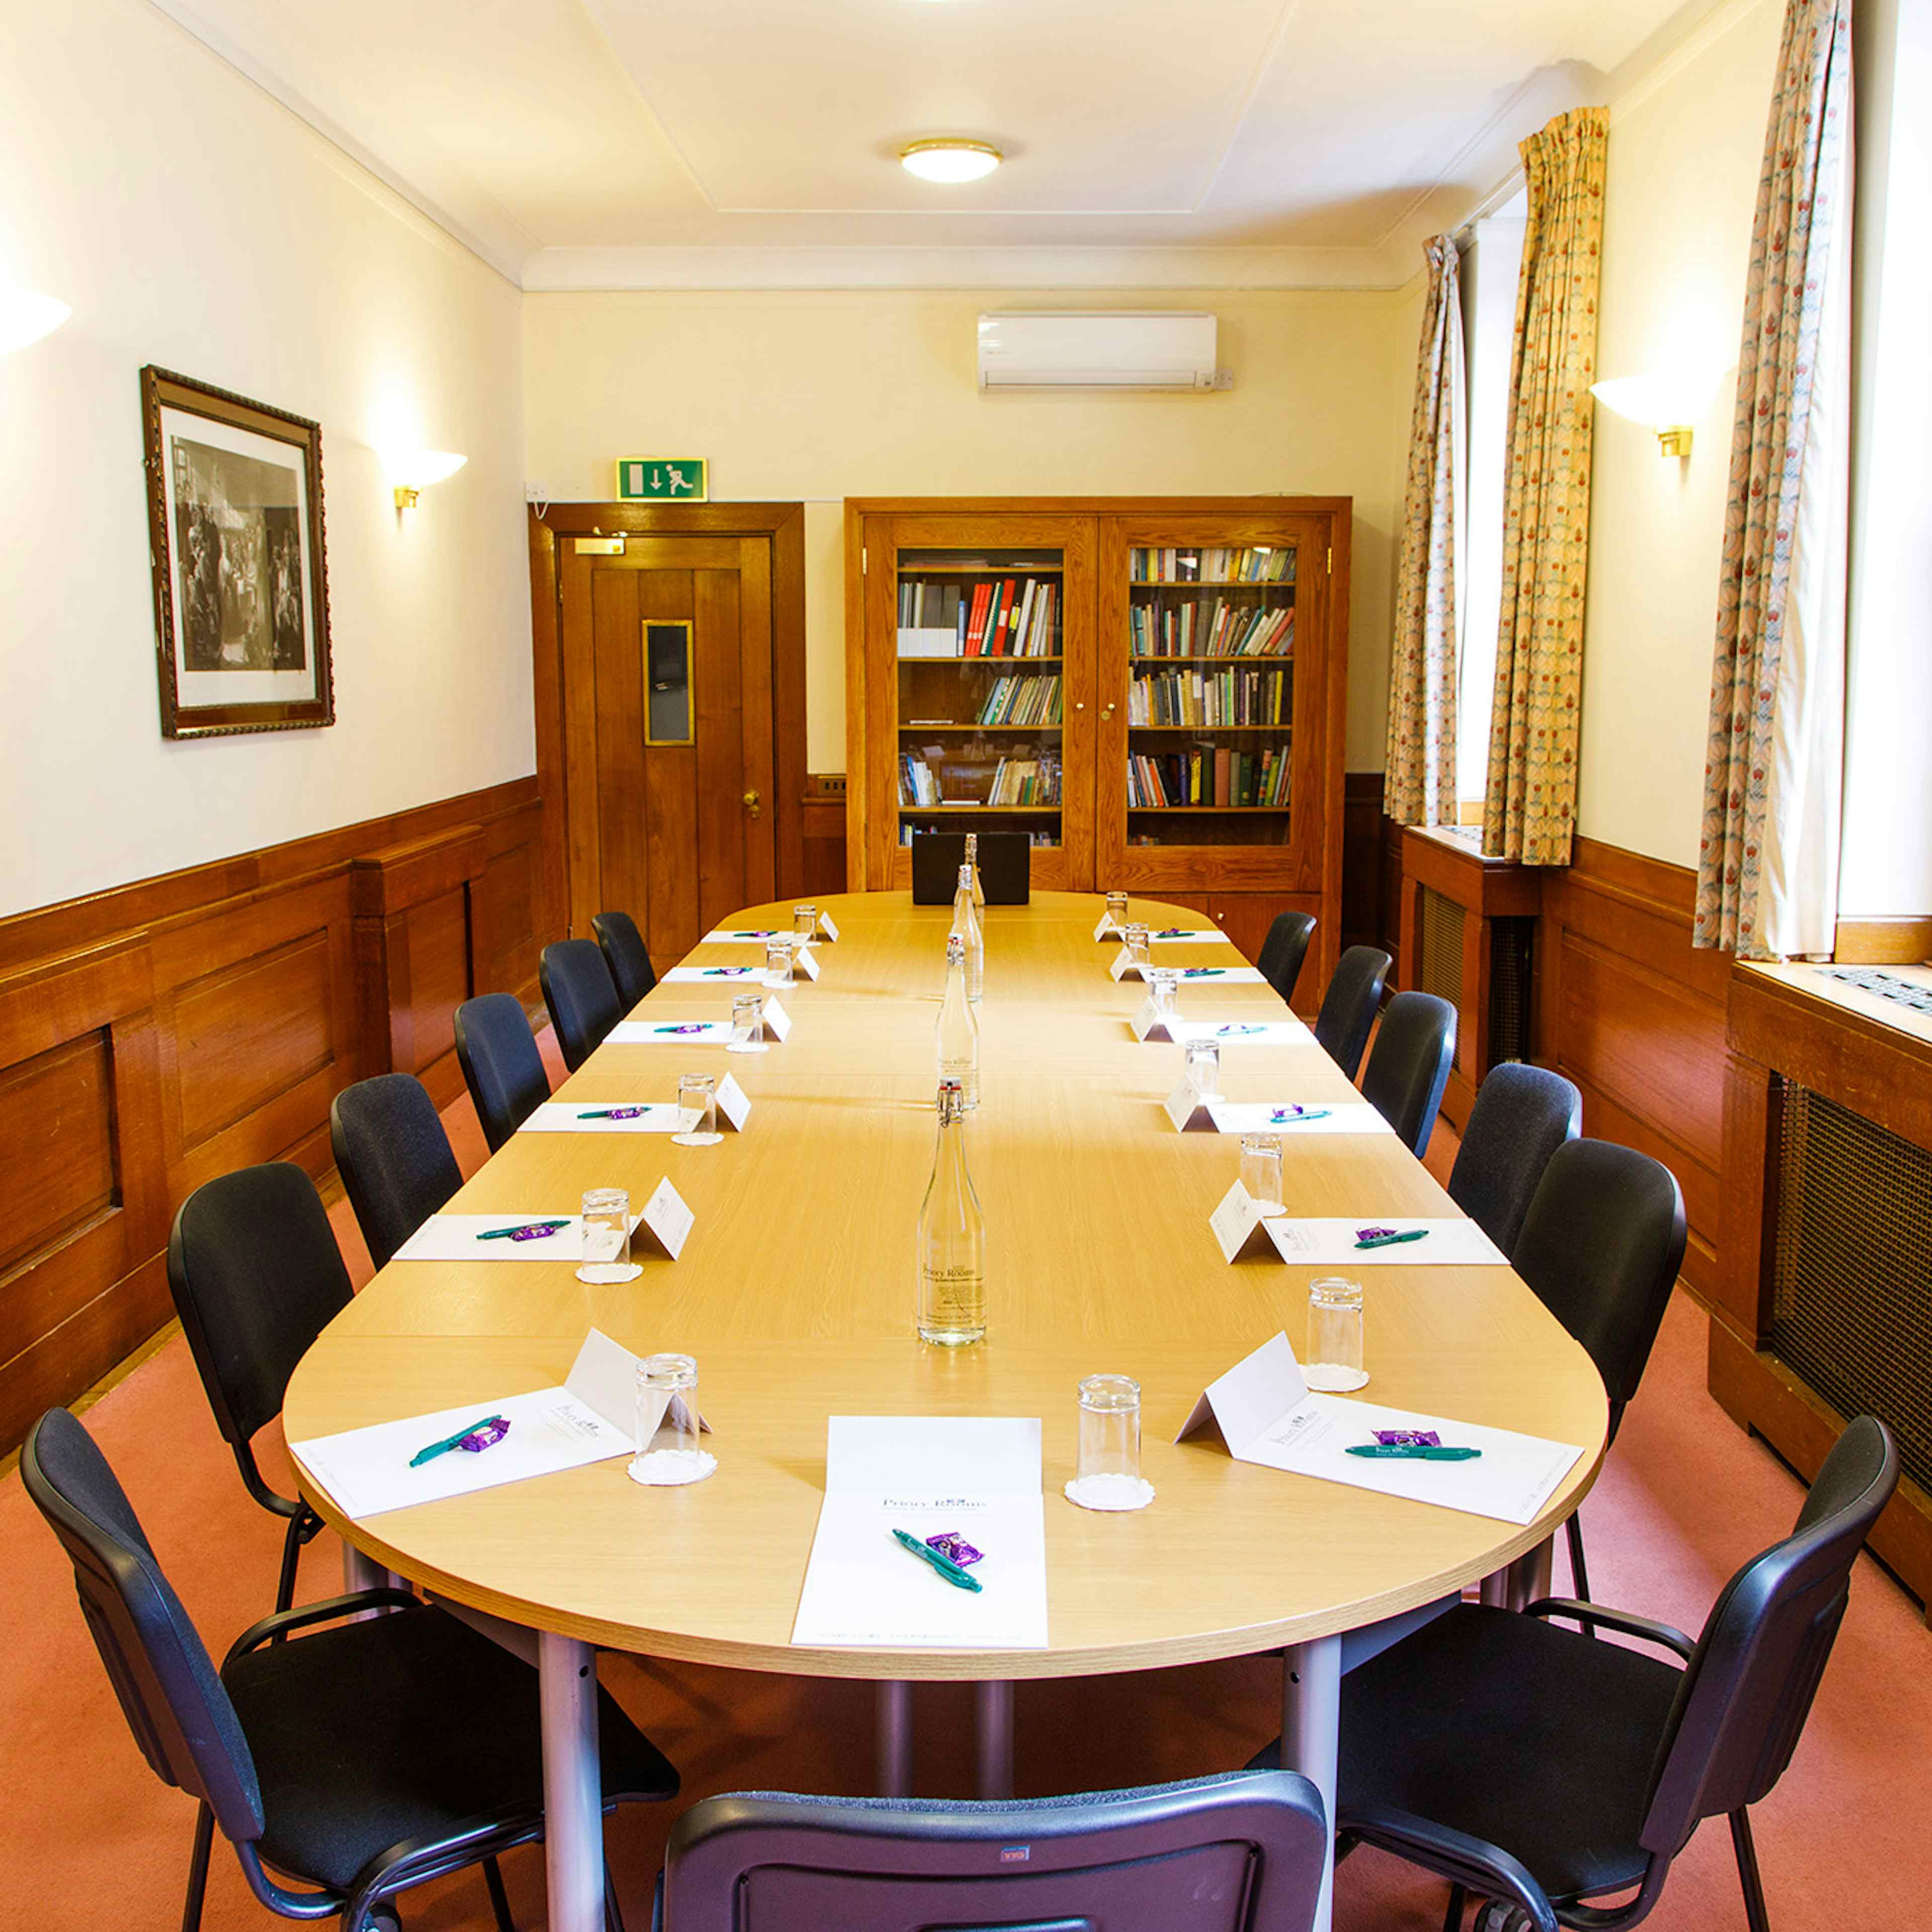 The Priory Rooms Meeting and Conference Centre  - Reading room image 1